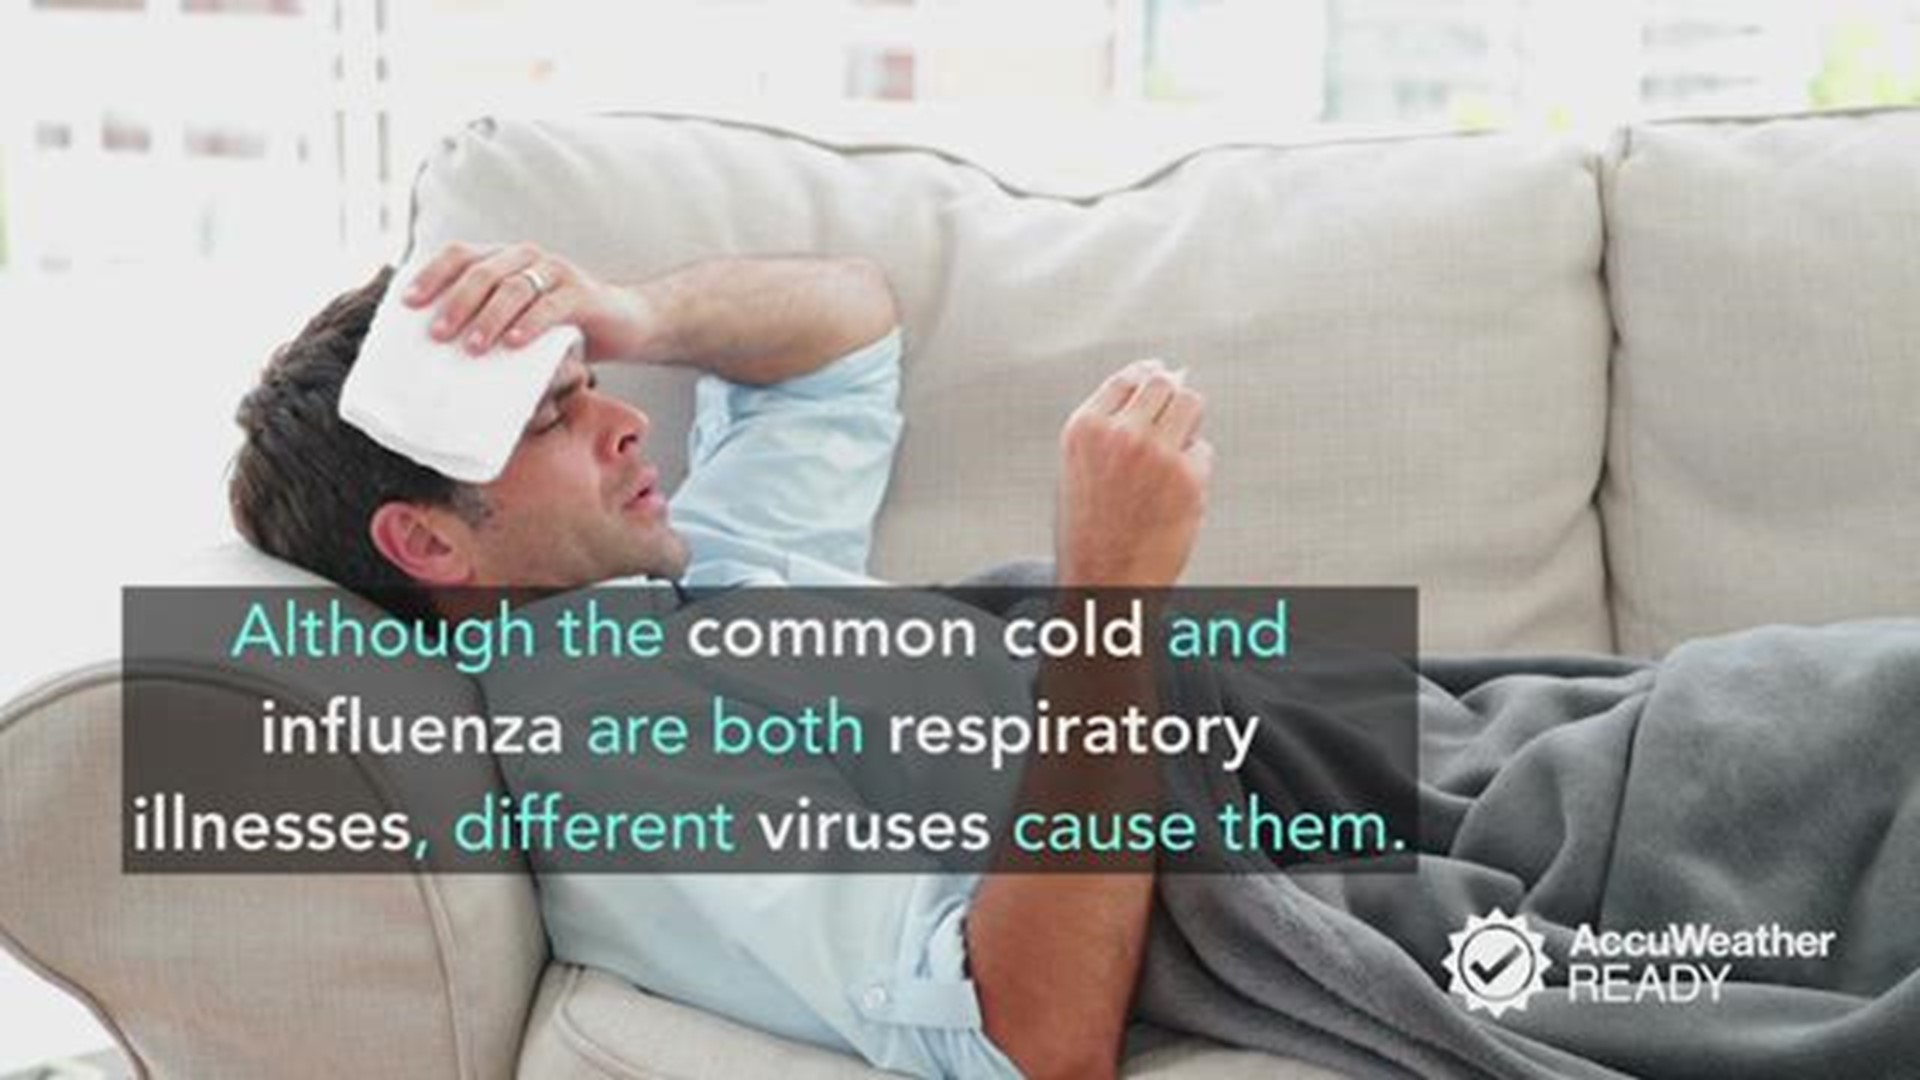 It can be hard to tell the difference between the flu and the common cold based solely on symptoms.